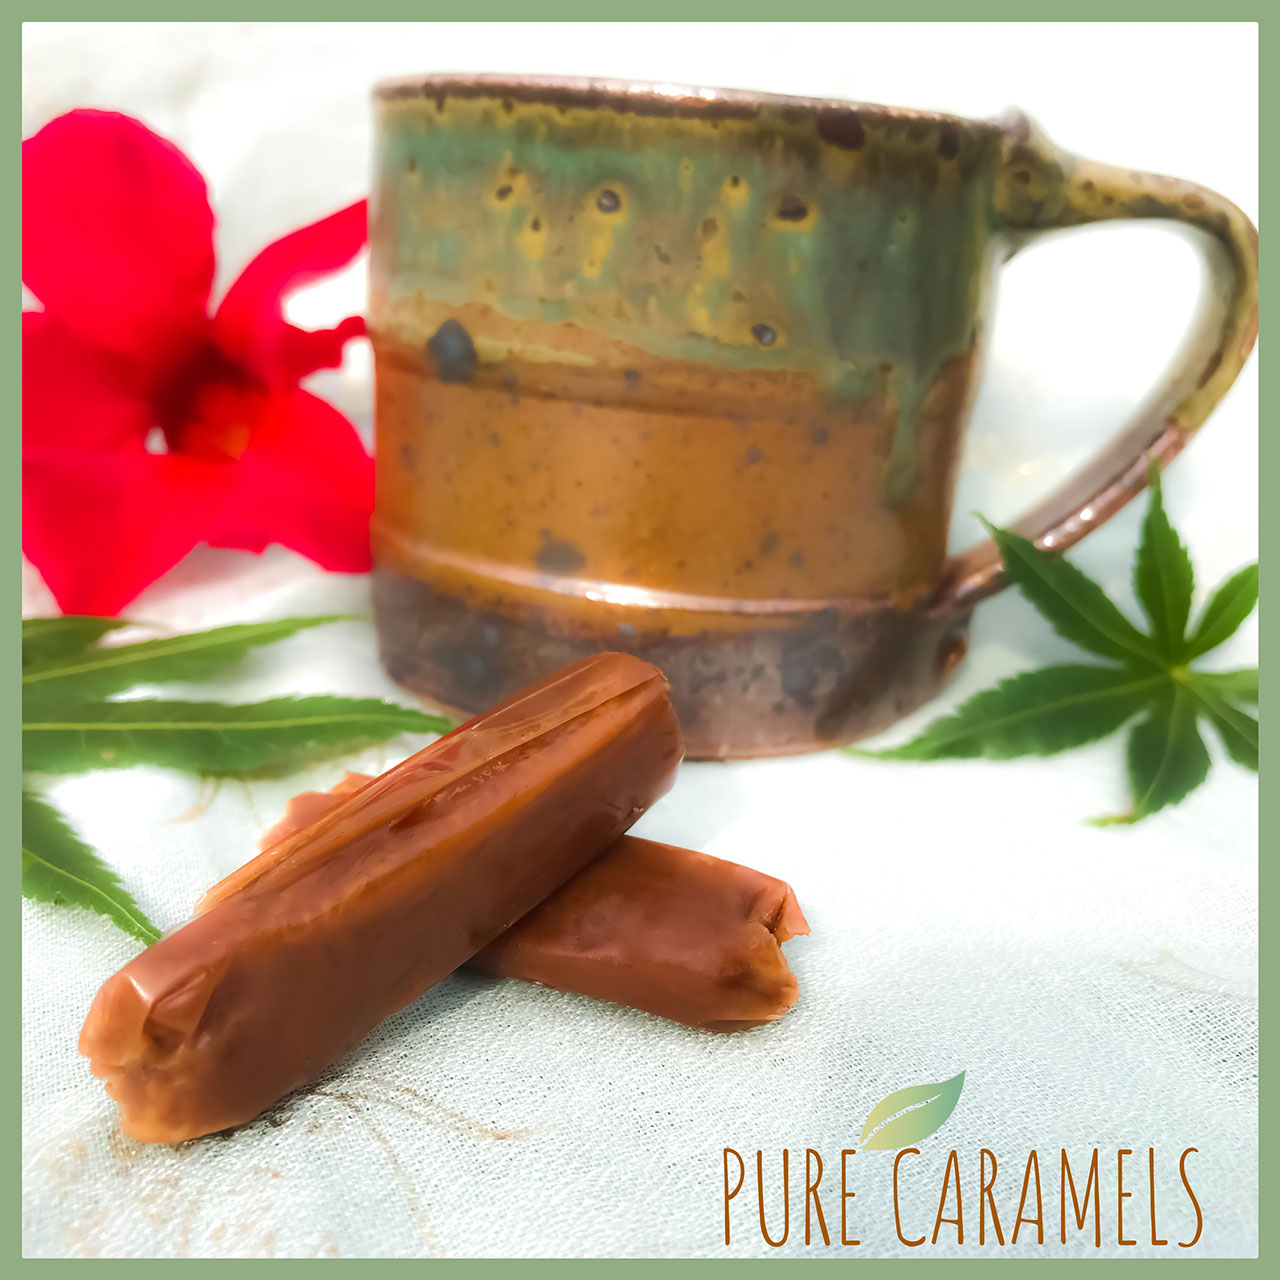 PURE-caramels-medicated-candy-2018